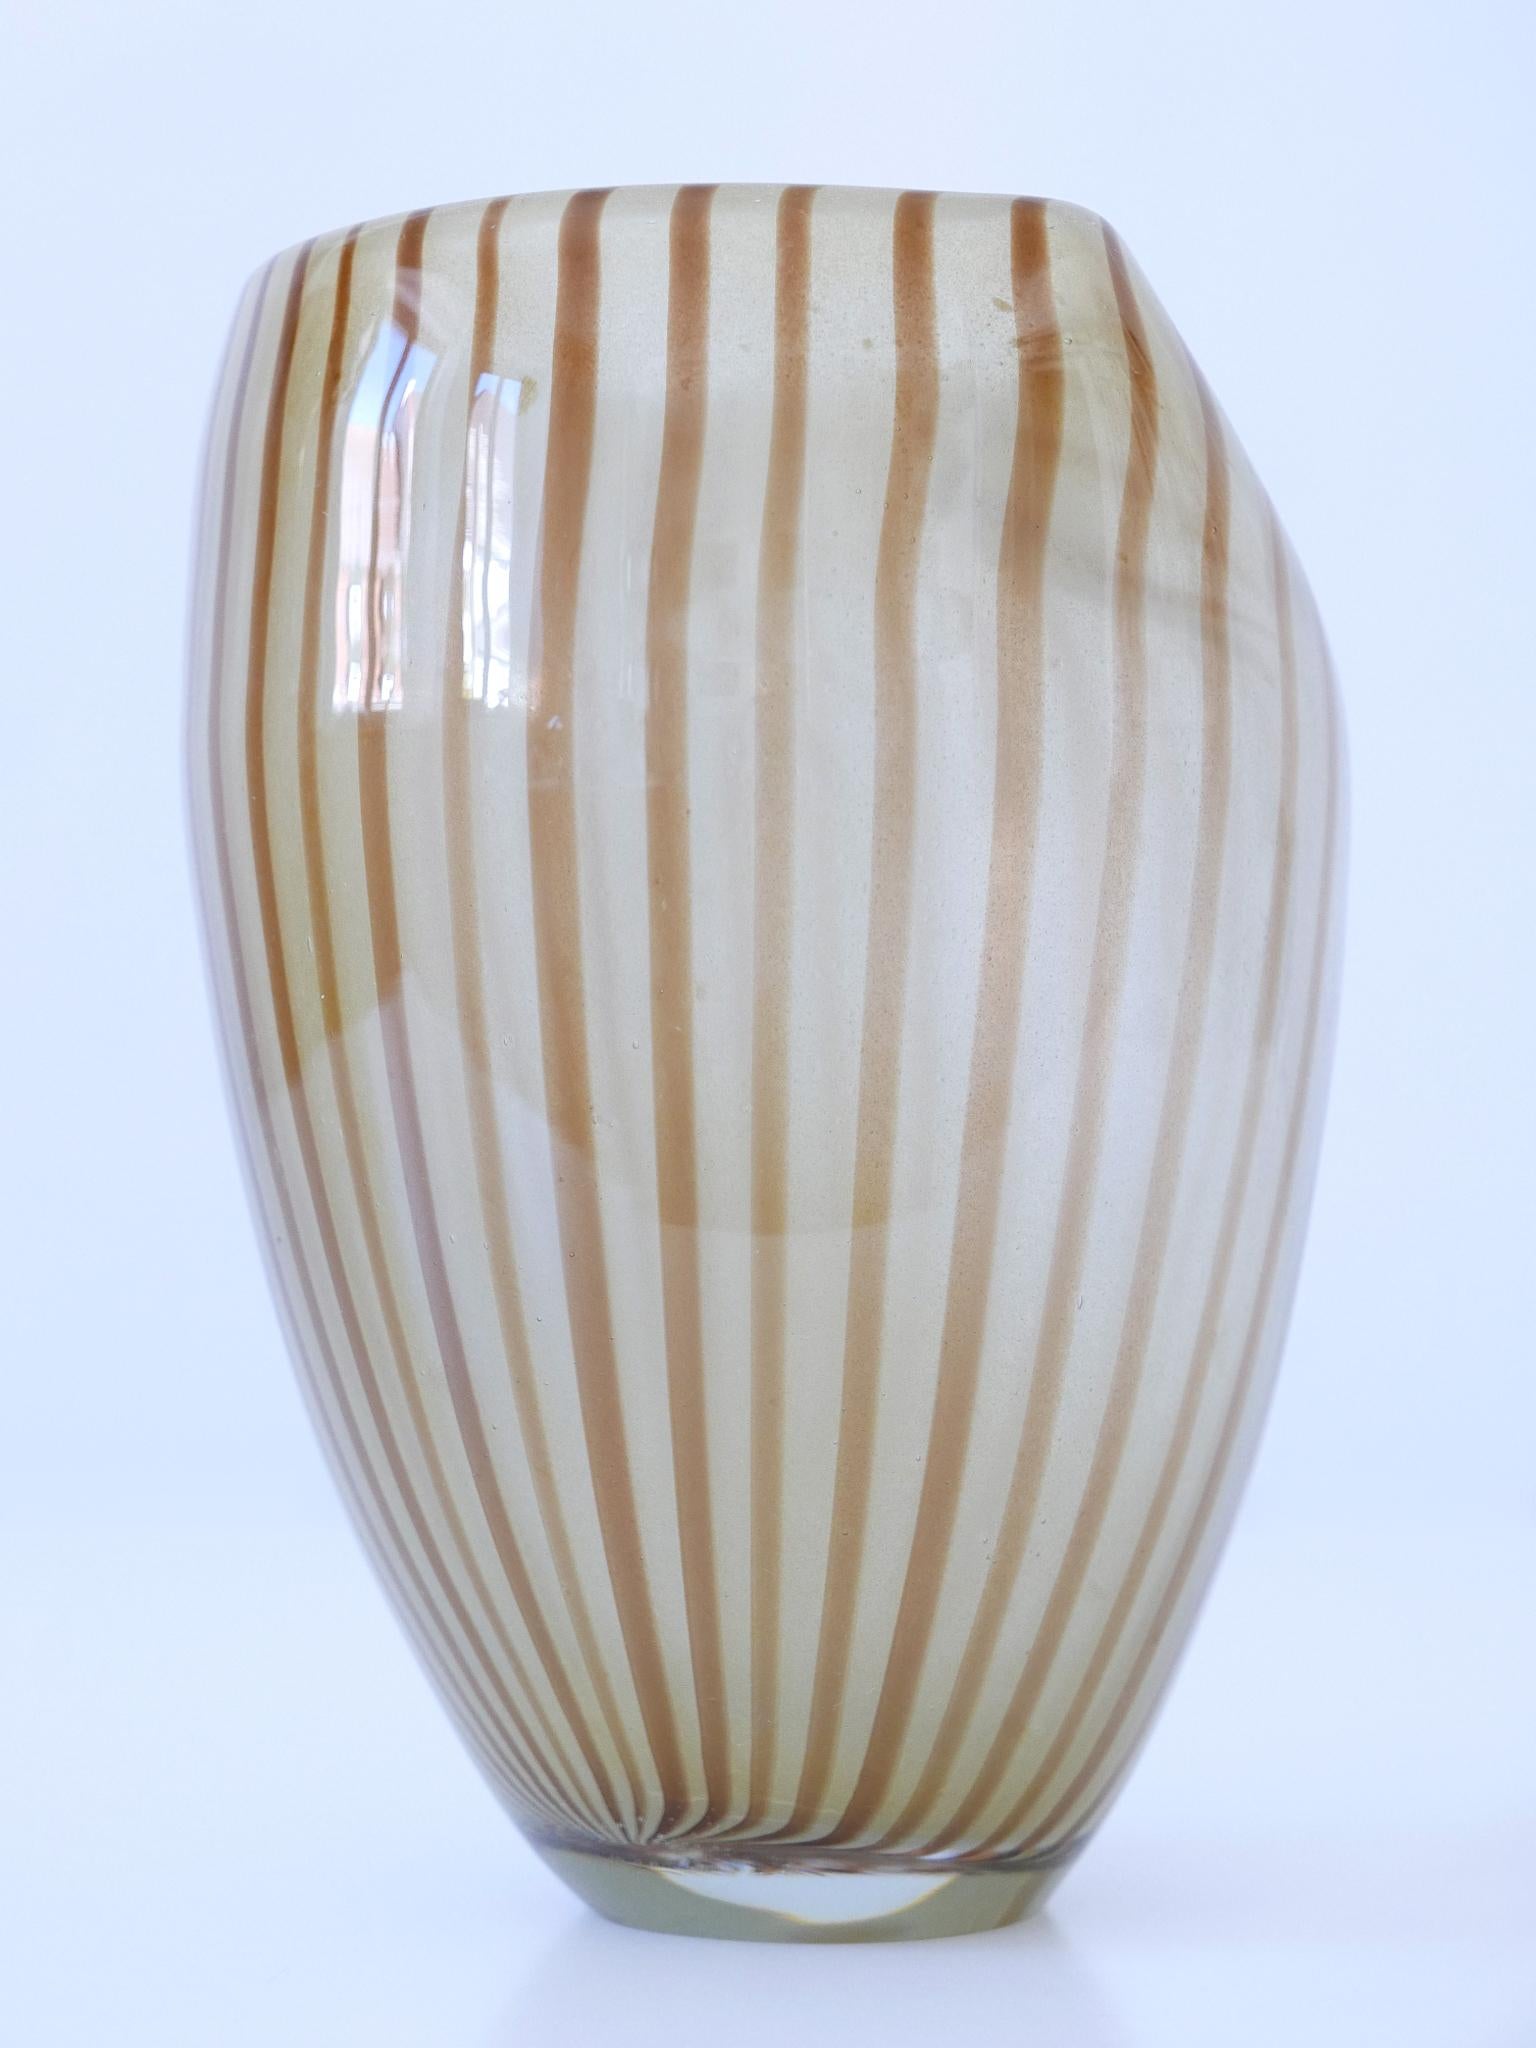 Decorative Mid Century Modern Murano Glass Vase Italy 1960s  For Sale 1